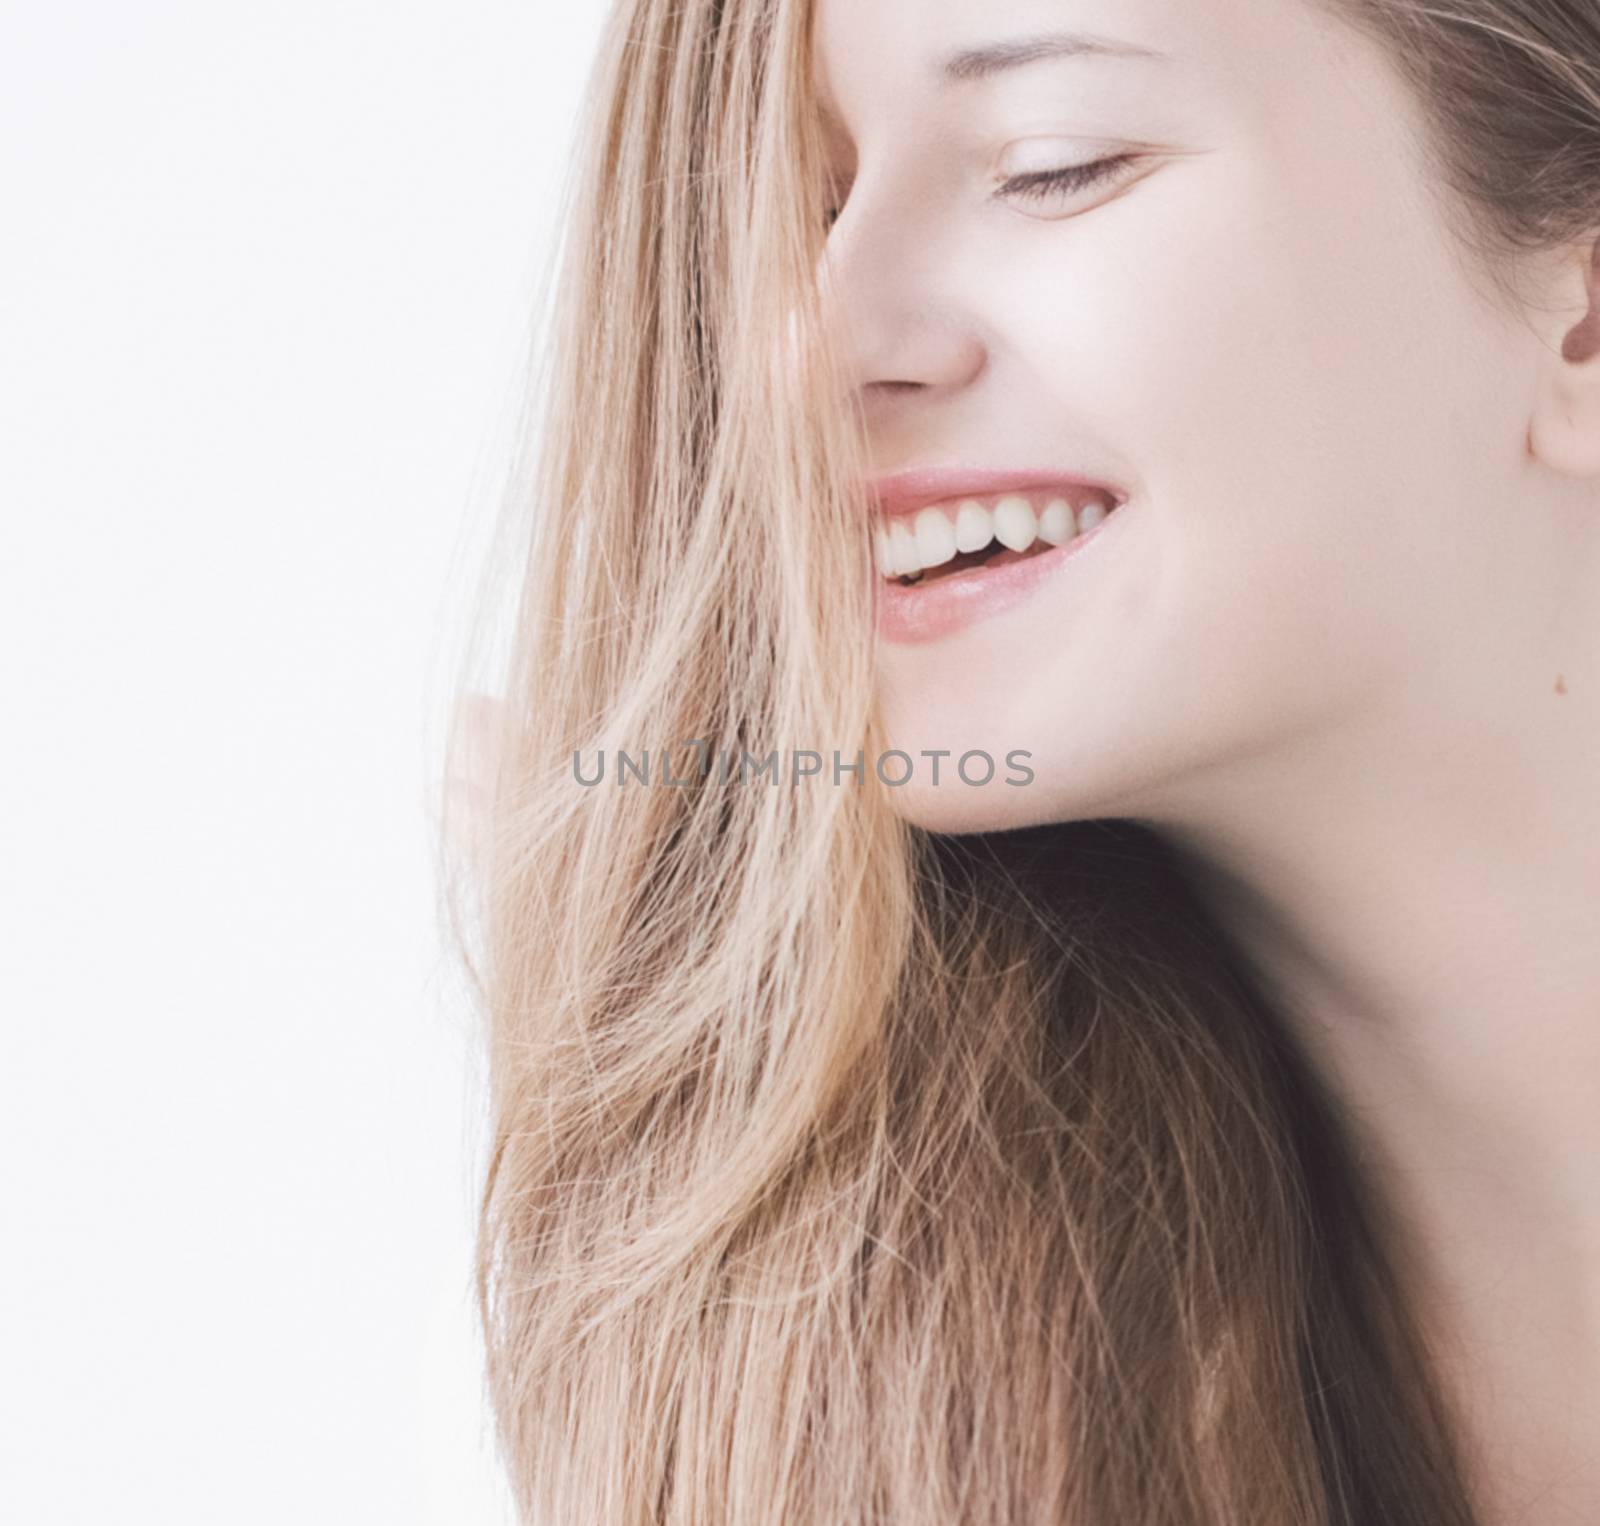 Feminine beauty, closeup face portrait of young woman with long hairstyle and natural makeup look for female hair care, cosmetic or skincare brand by Anneleven